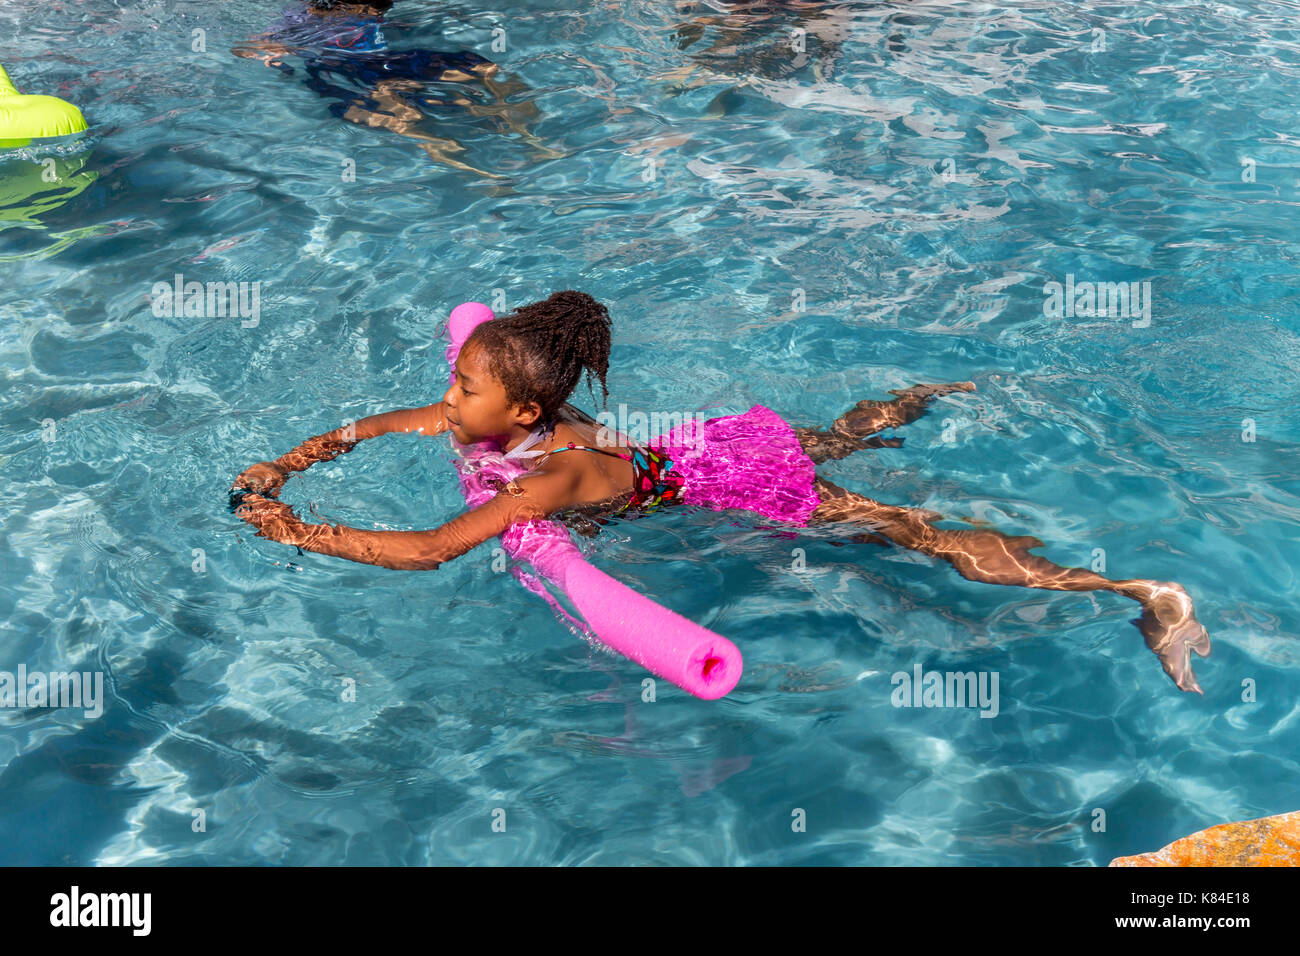 African-American girl, swimmer, swimming, swimming pool, freshwater swimming pool, Castro Valley, Alameda County, California, United States Stock Photo